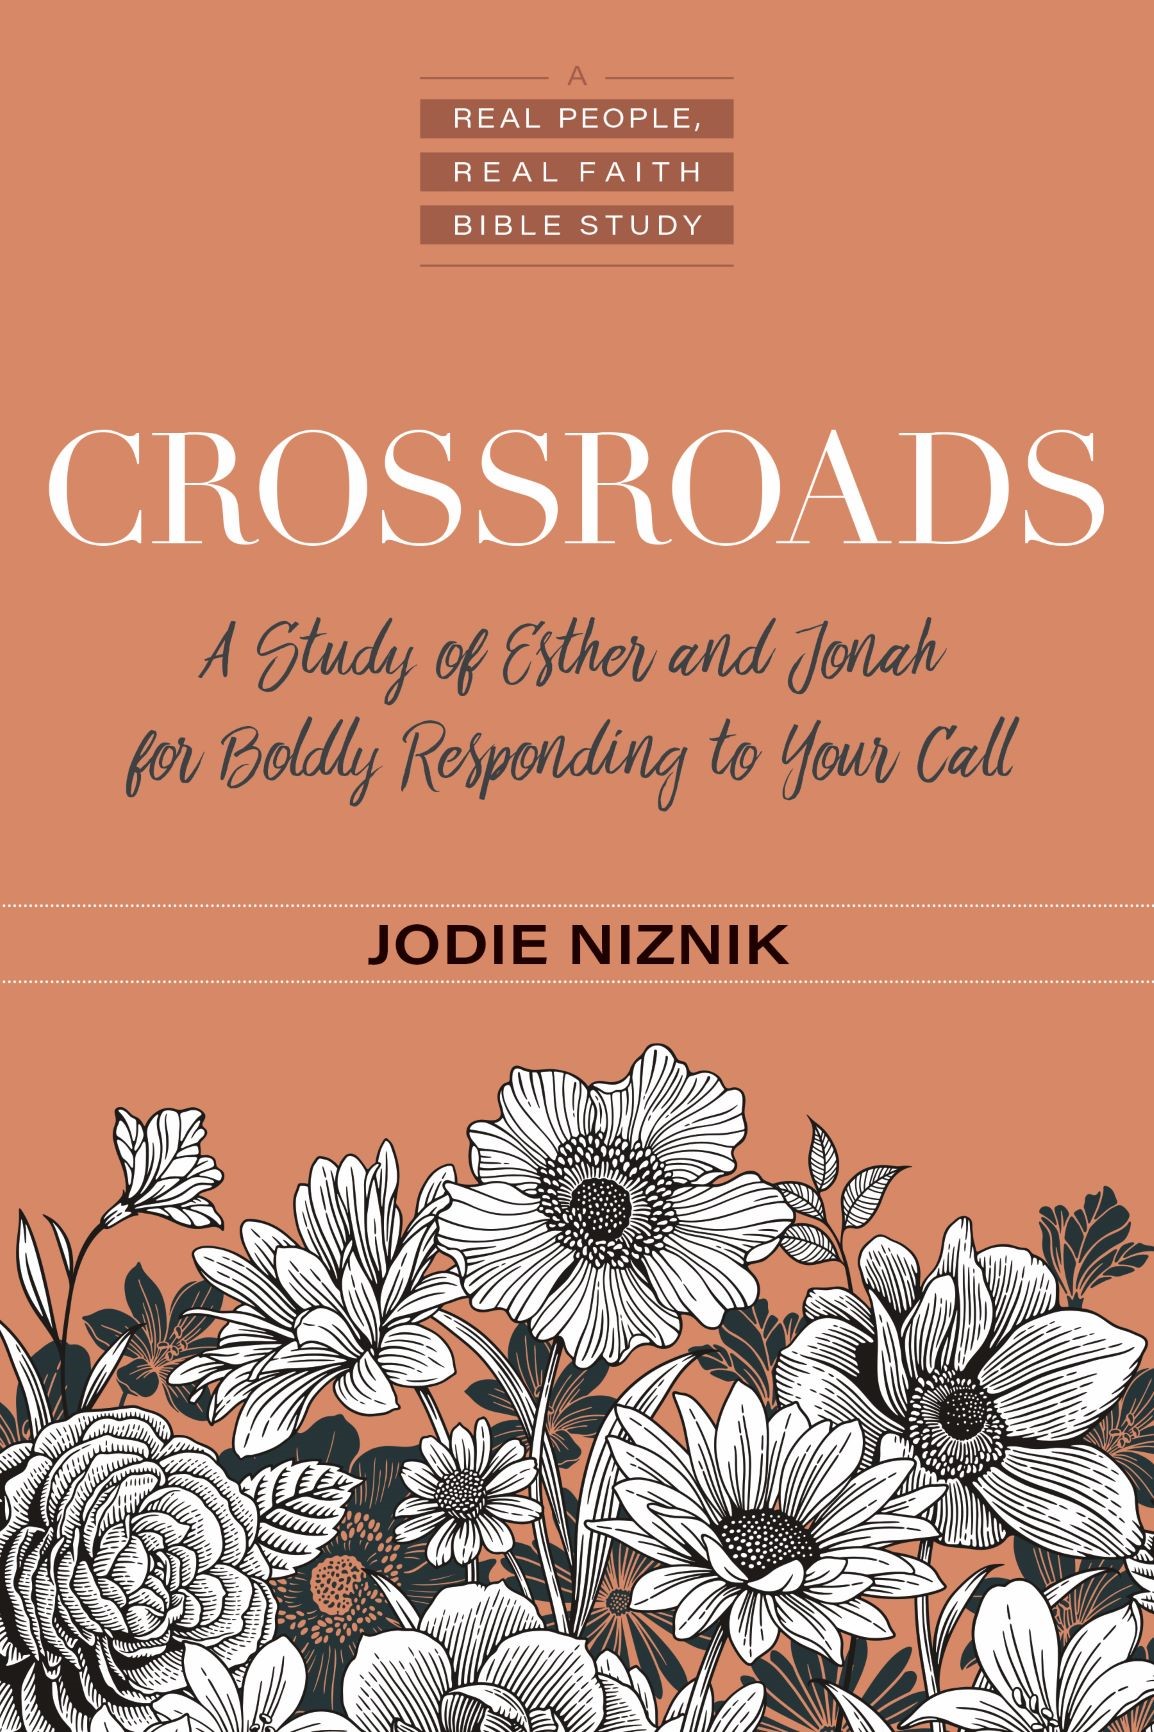 You are currently viewing Part 2 of an Interview with Jodie Niznik, Author of Crossroads